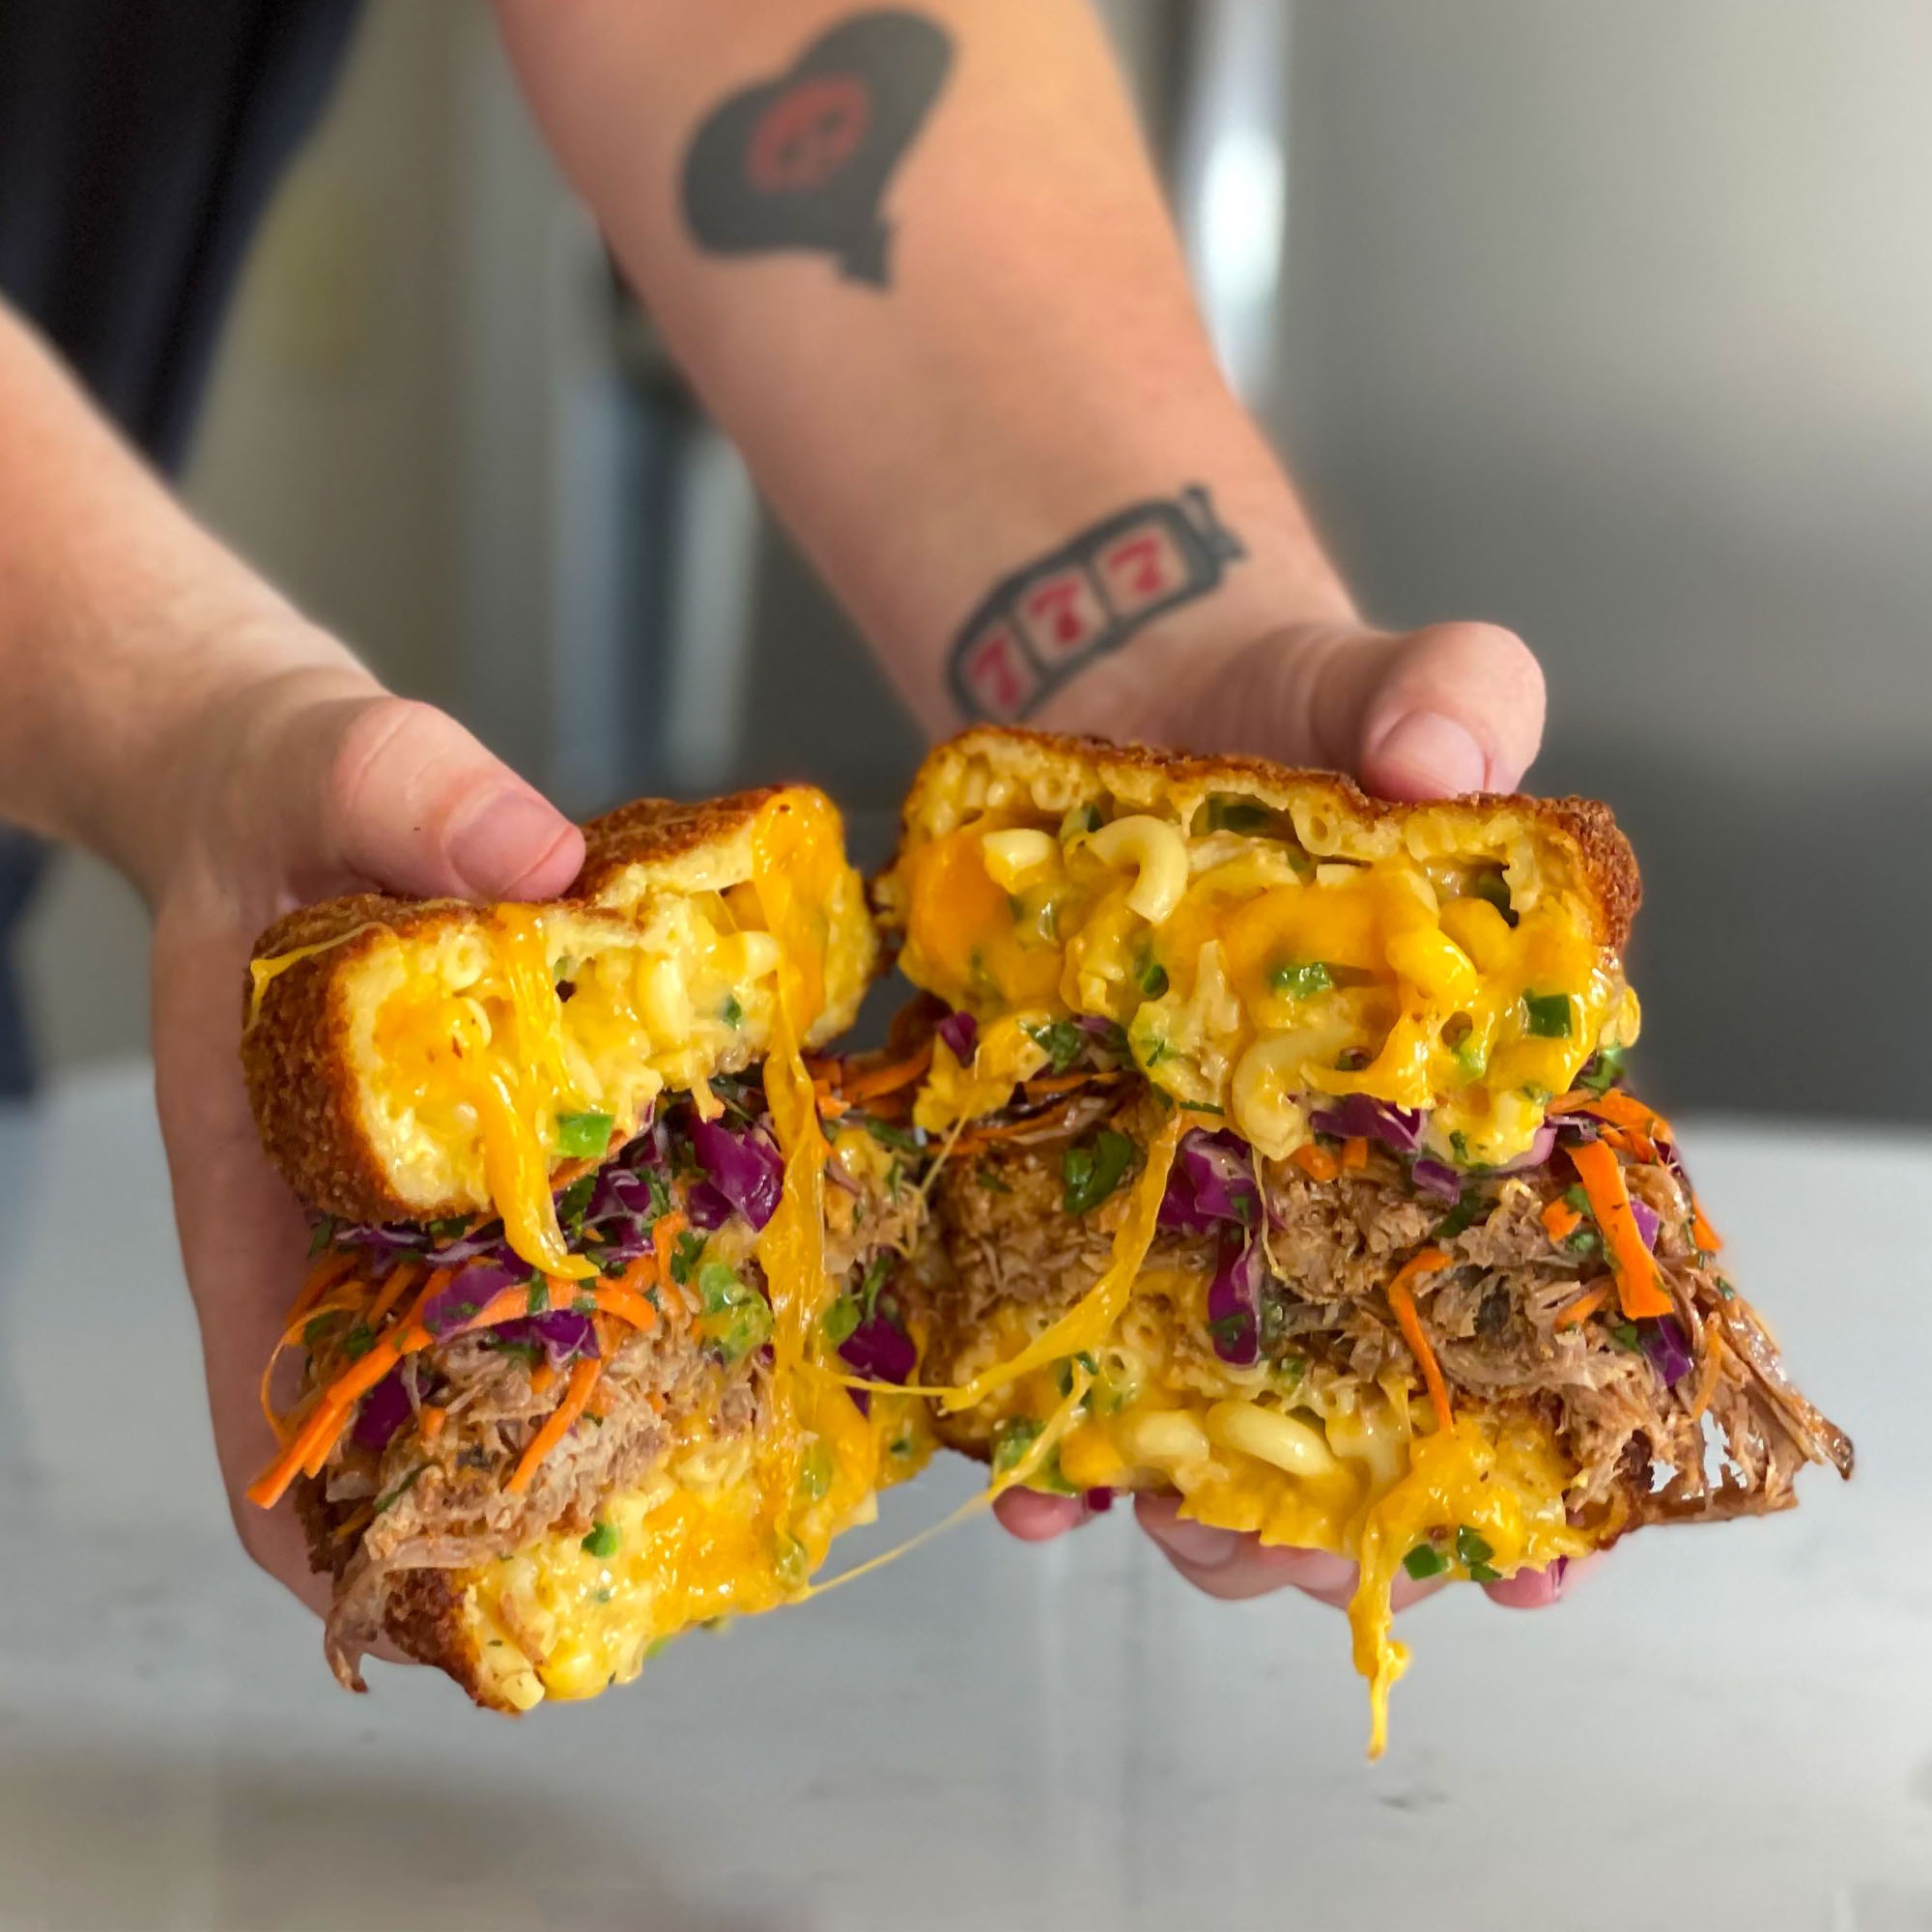 The Pulled Pork Sandwich With a Deep Fried Macaroni and Cheese Bun